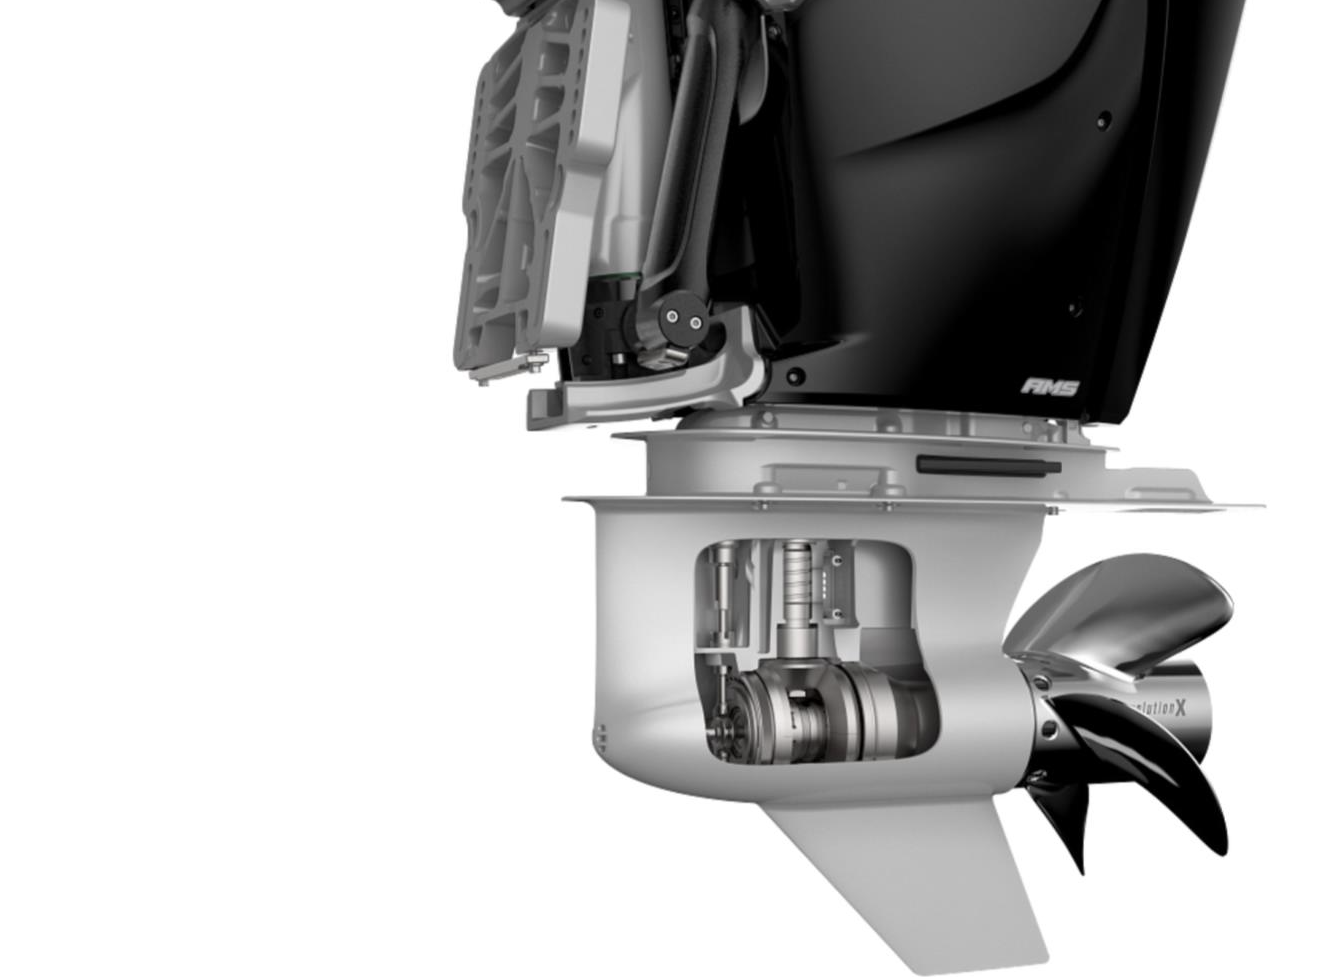 outboard engines, Mercury Marine, New Engines, News Story